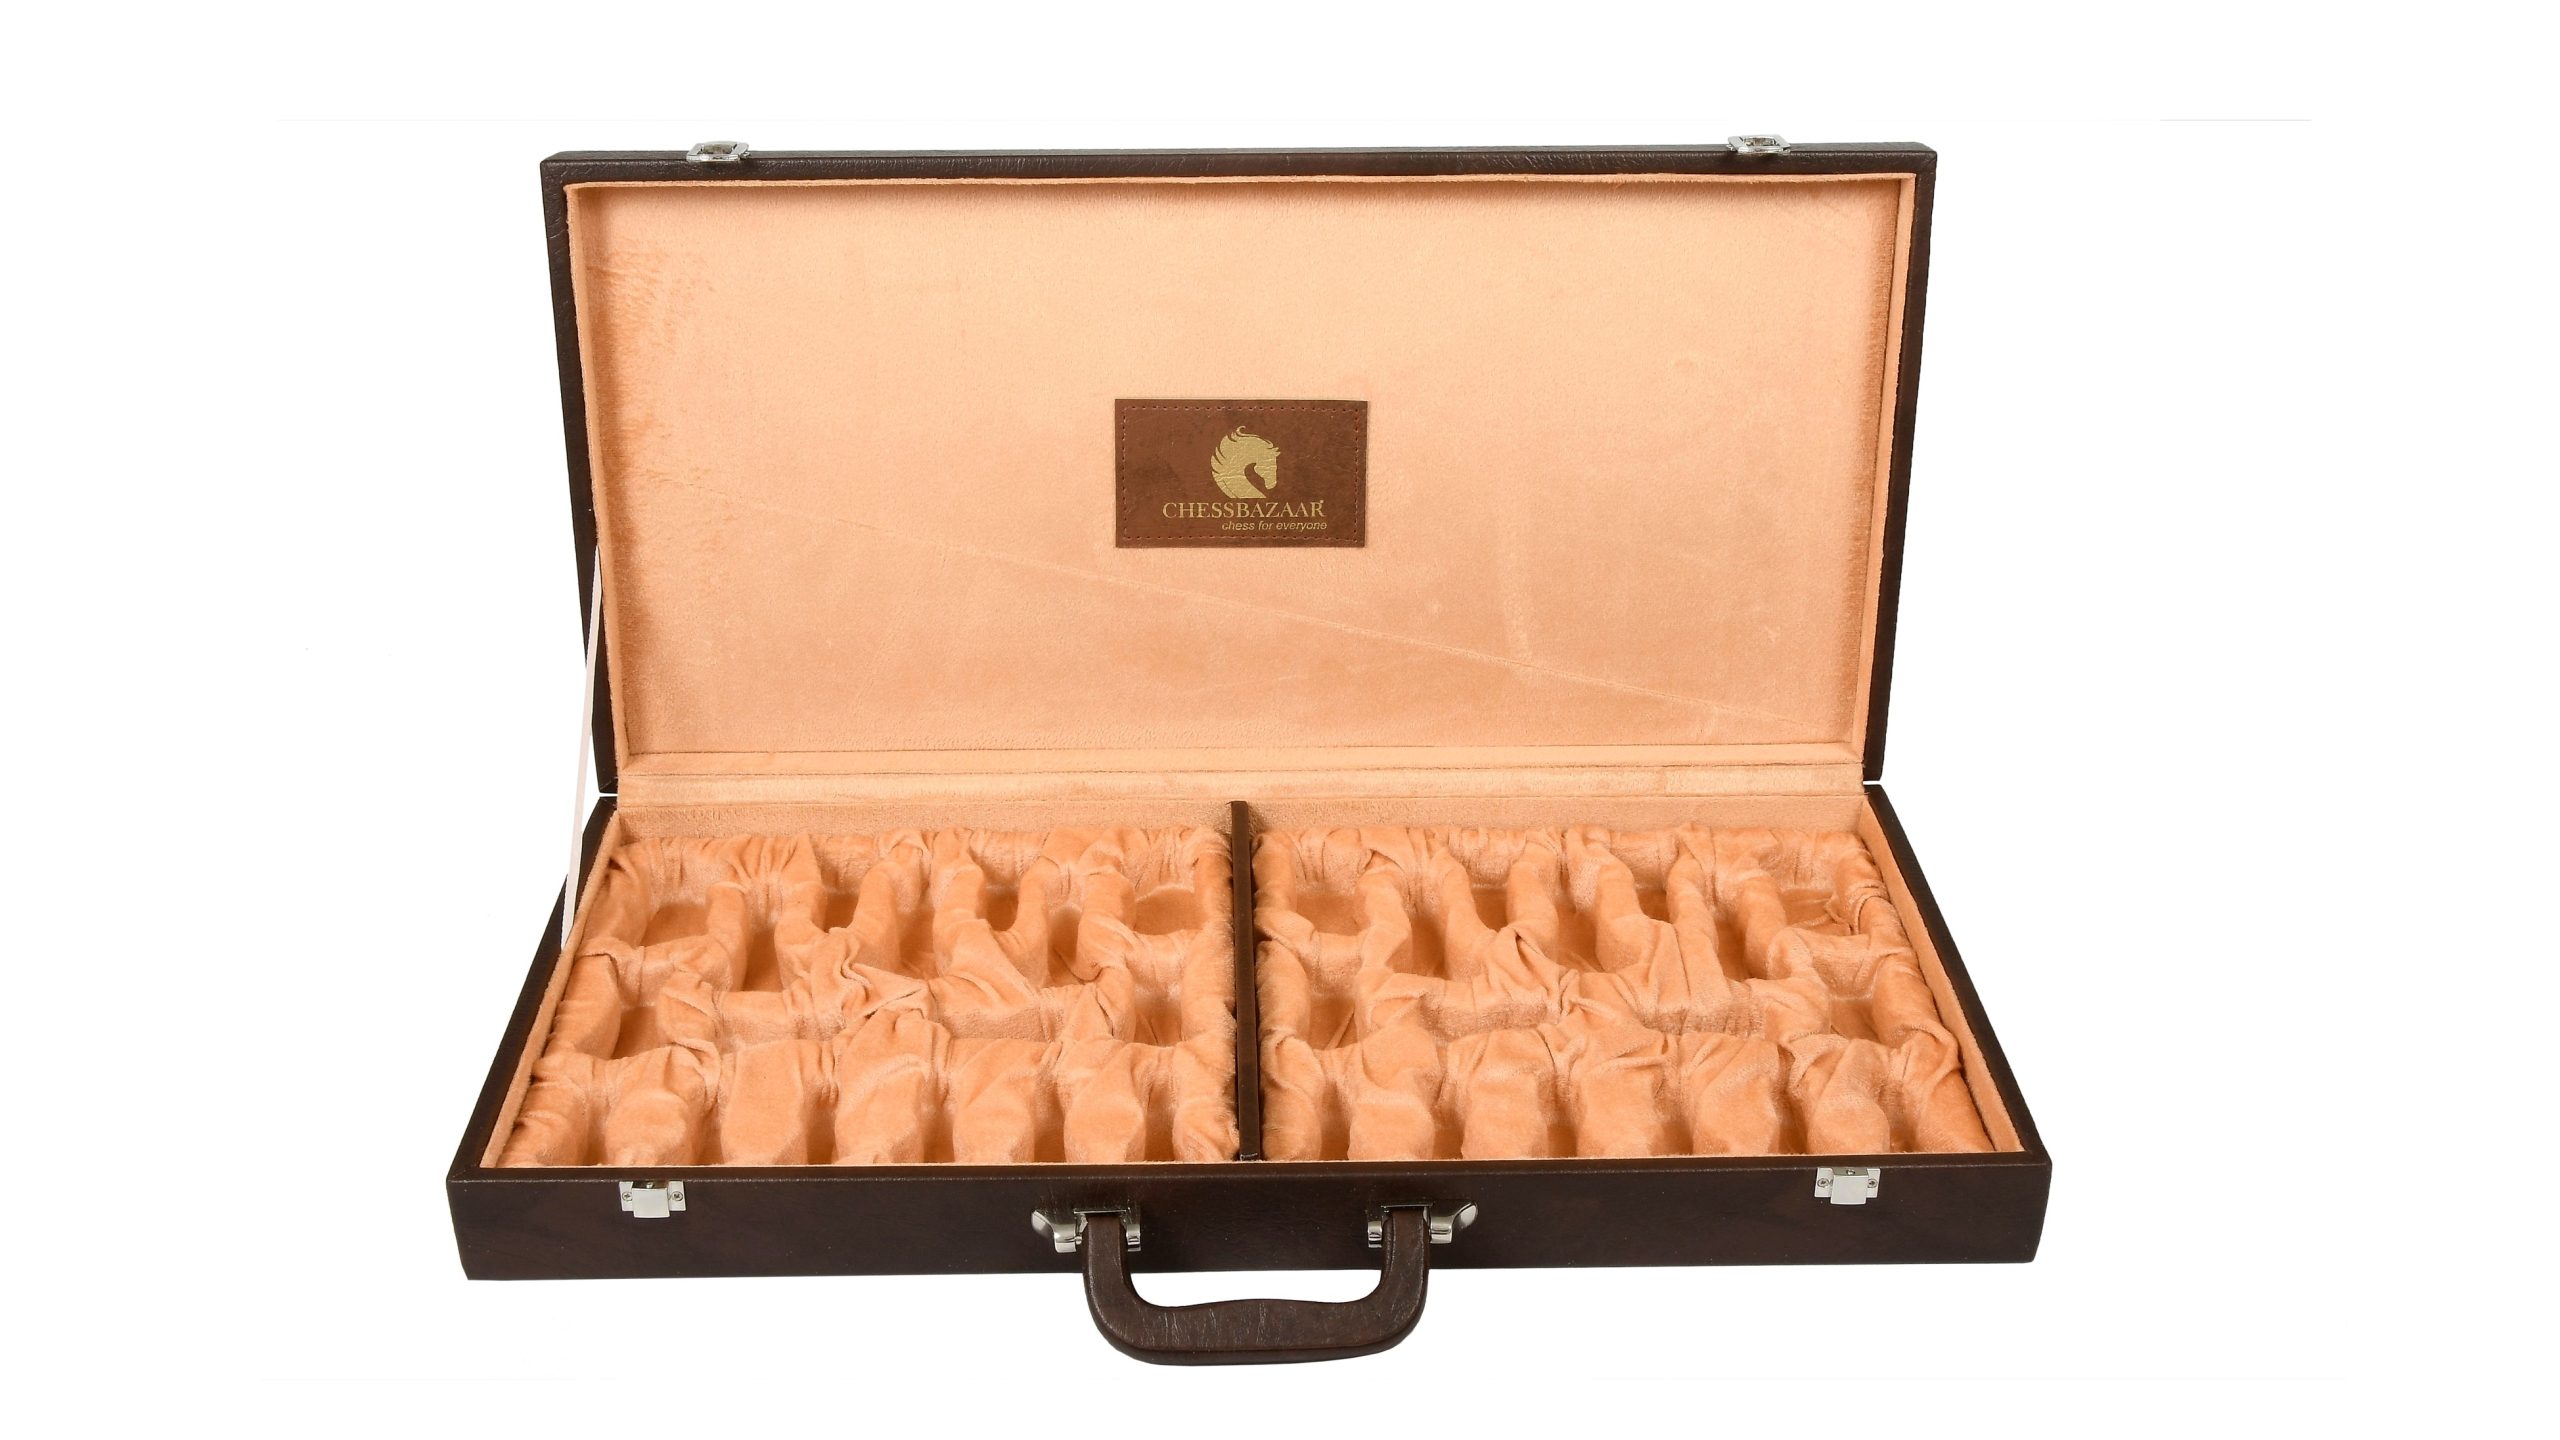 LEATHERETTE CHESS SET BRIEFCASE STORAGE BOX COFFER (BROWN COLOR) WITH FIXED SLOTS